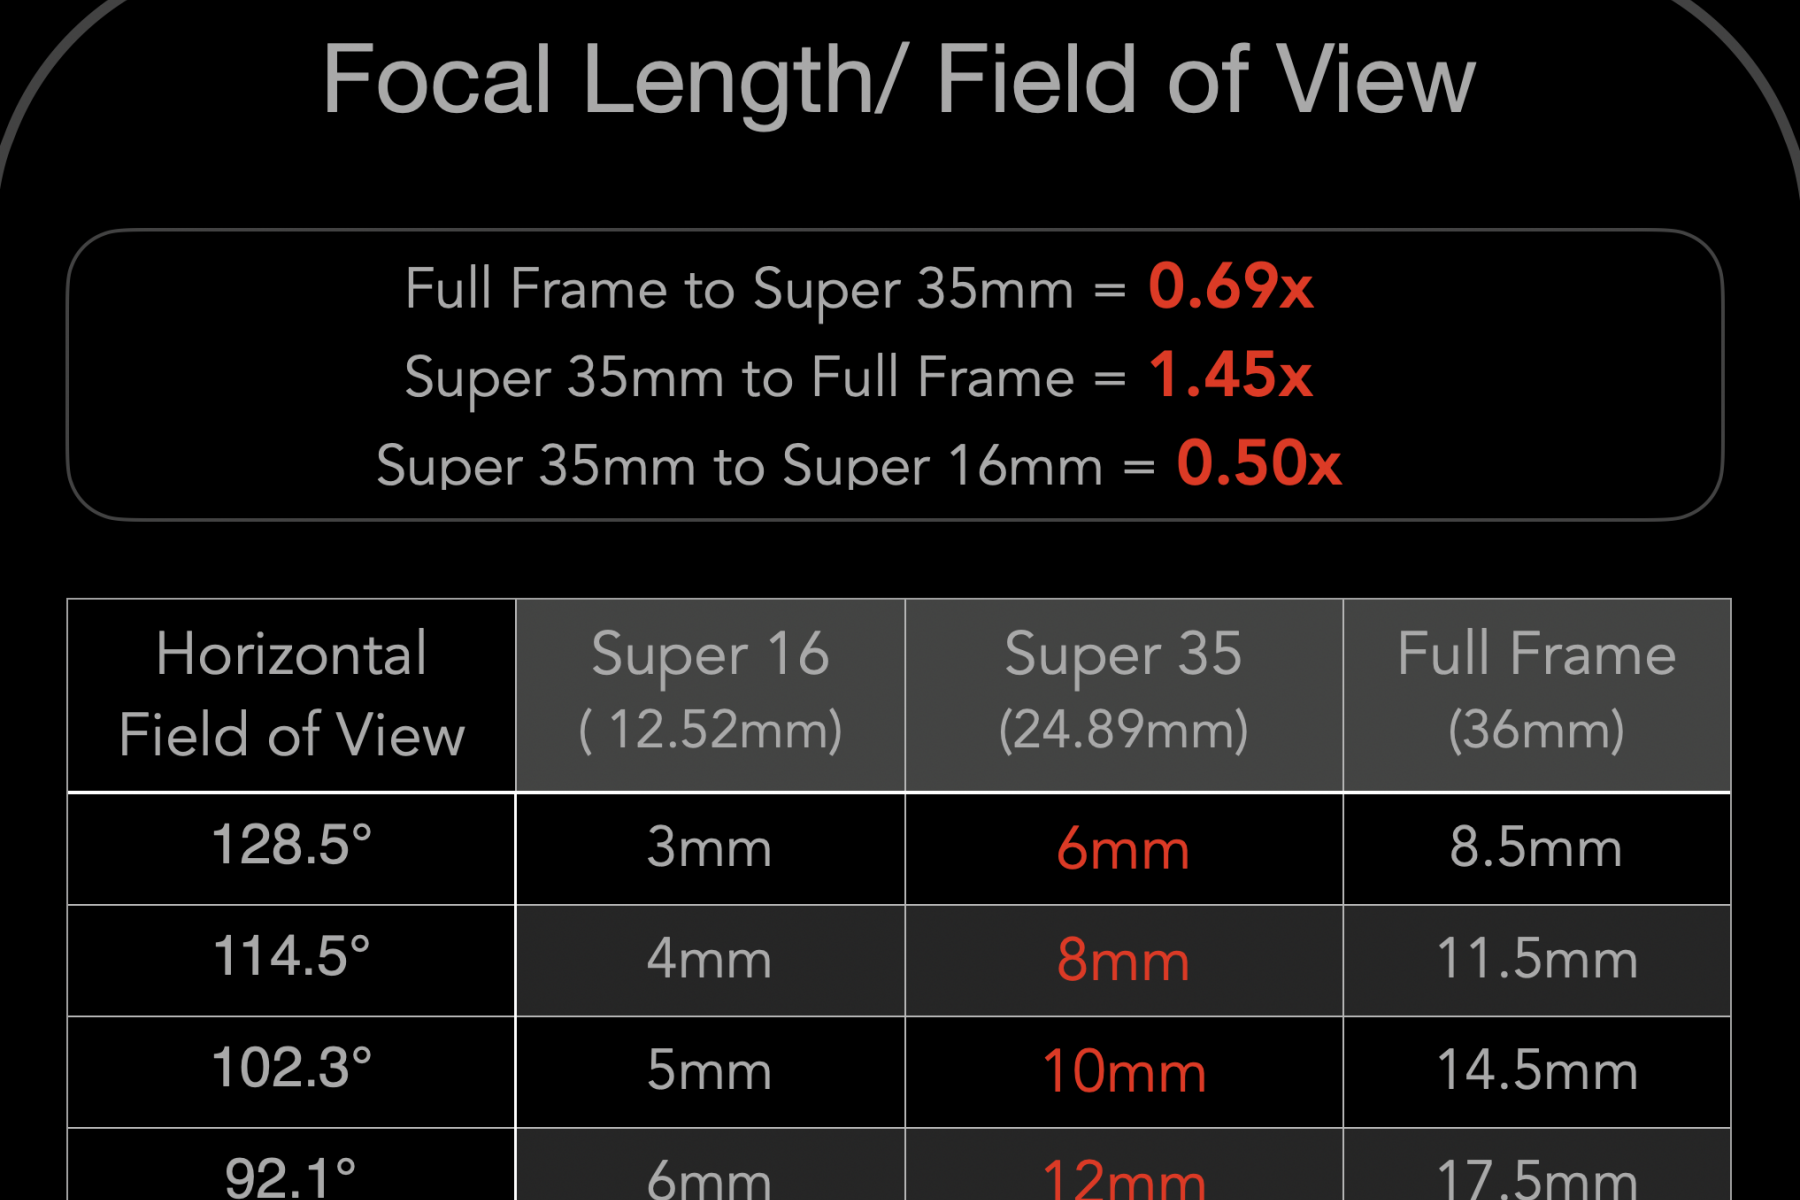 Calculate Fov S16mm S35mm And Full